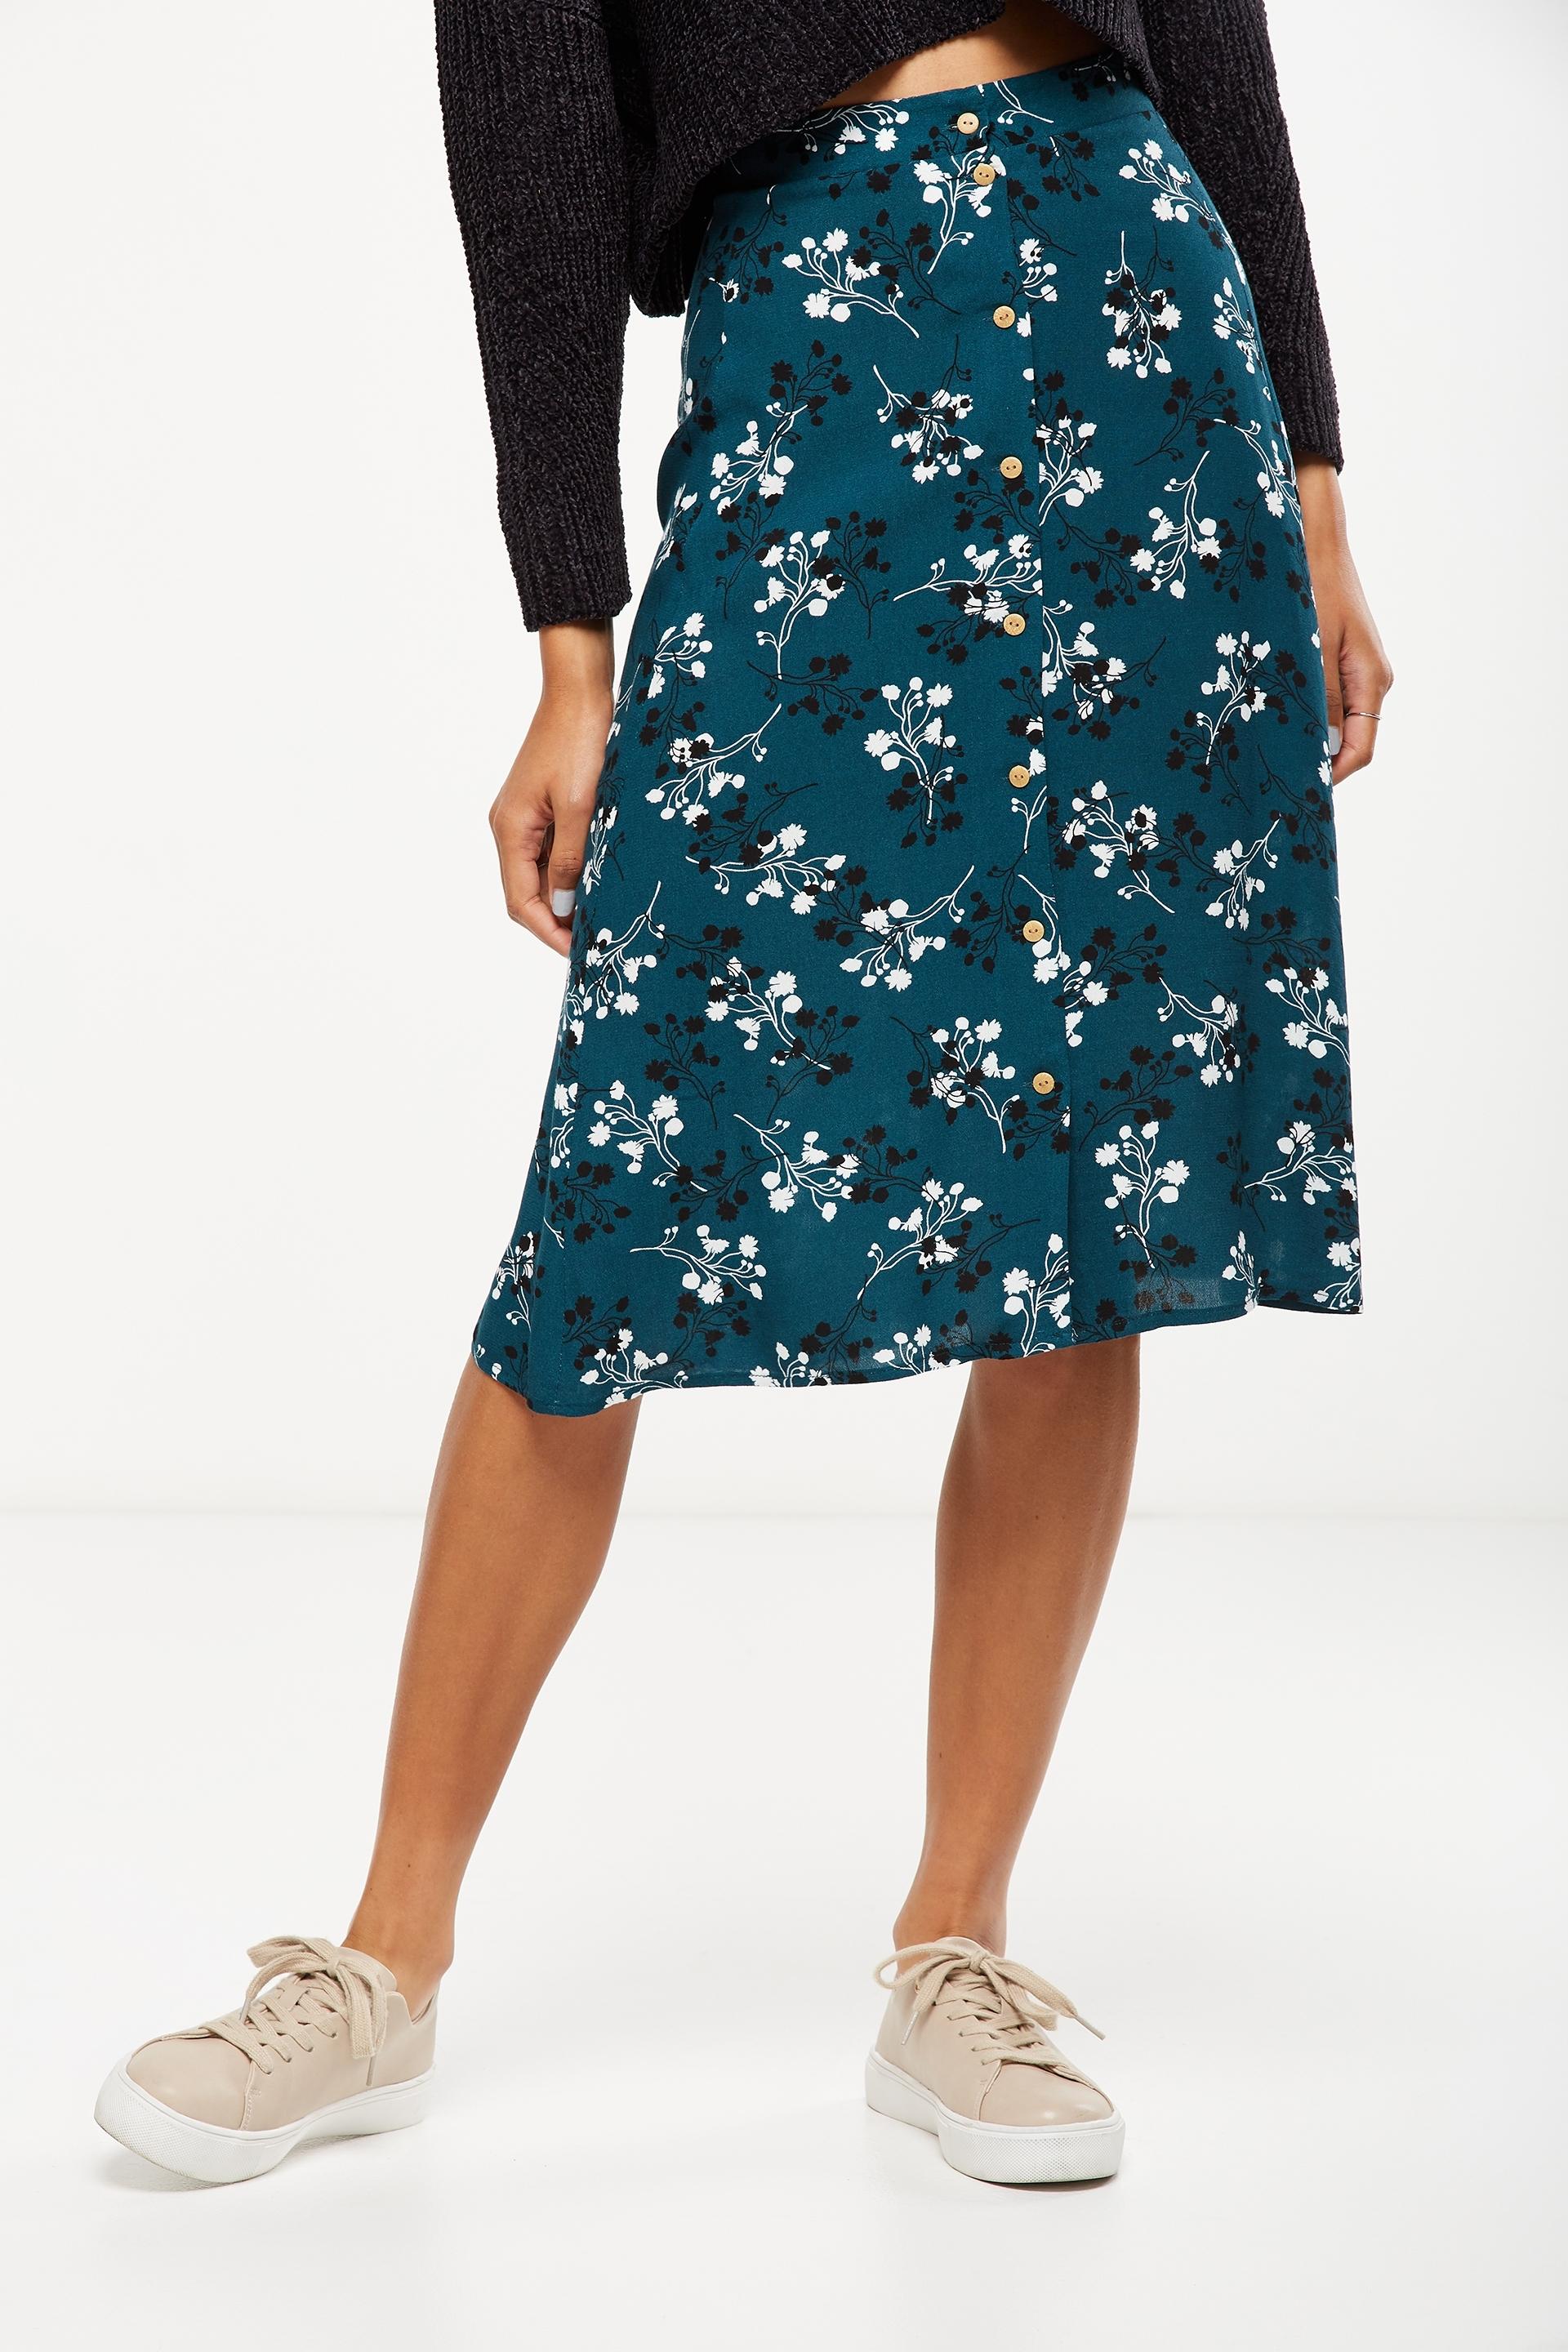 Woven ryder midi skirt - disty floral velvery green Cotton On Skirts ...